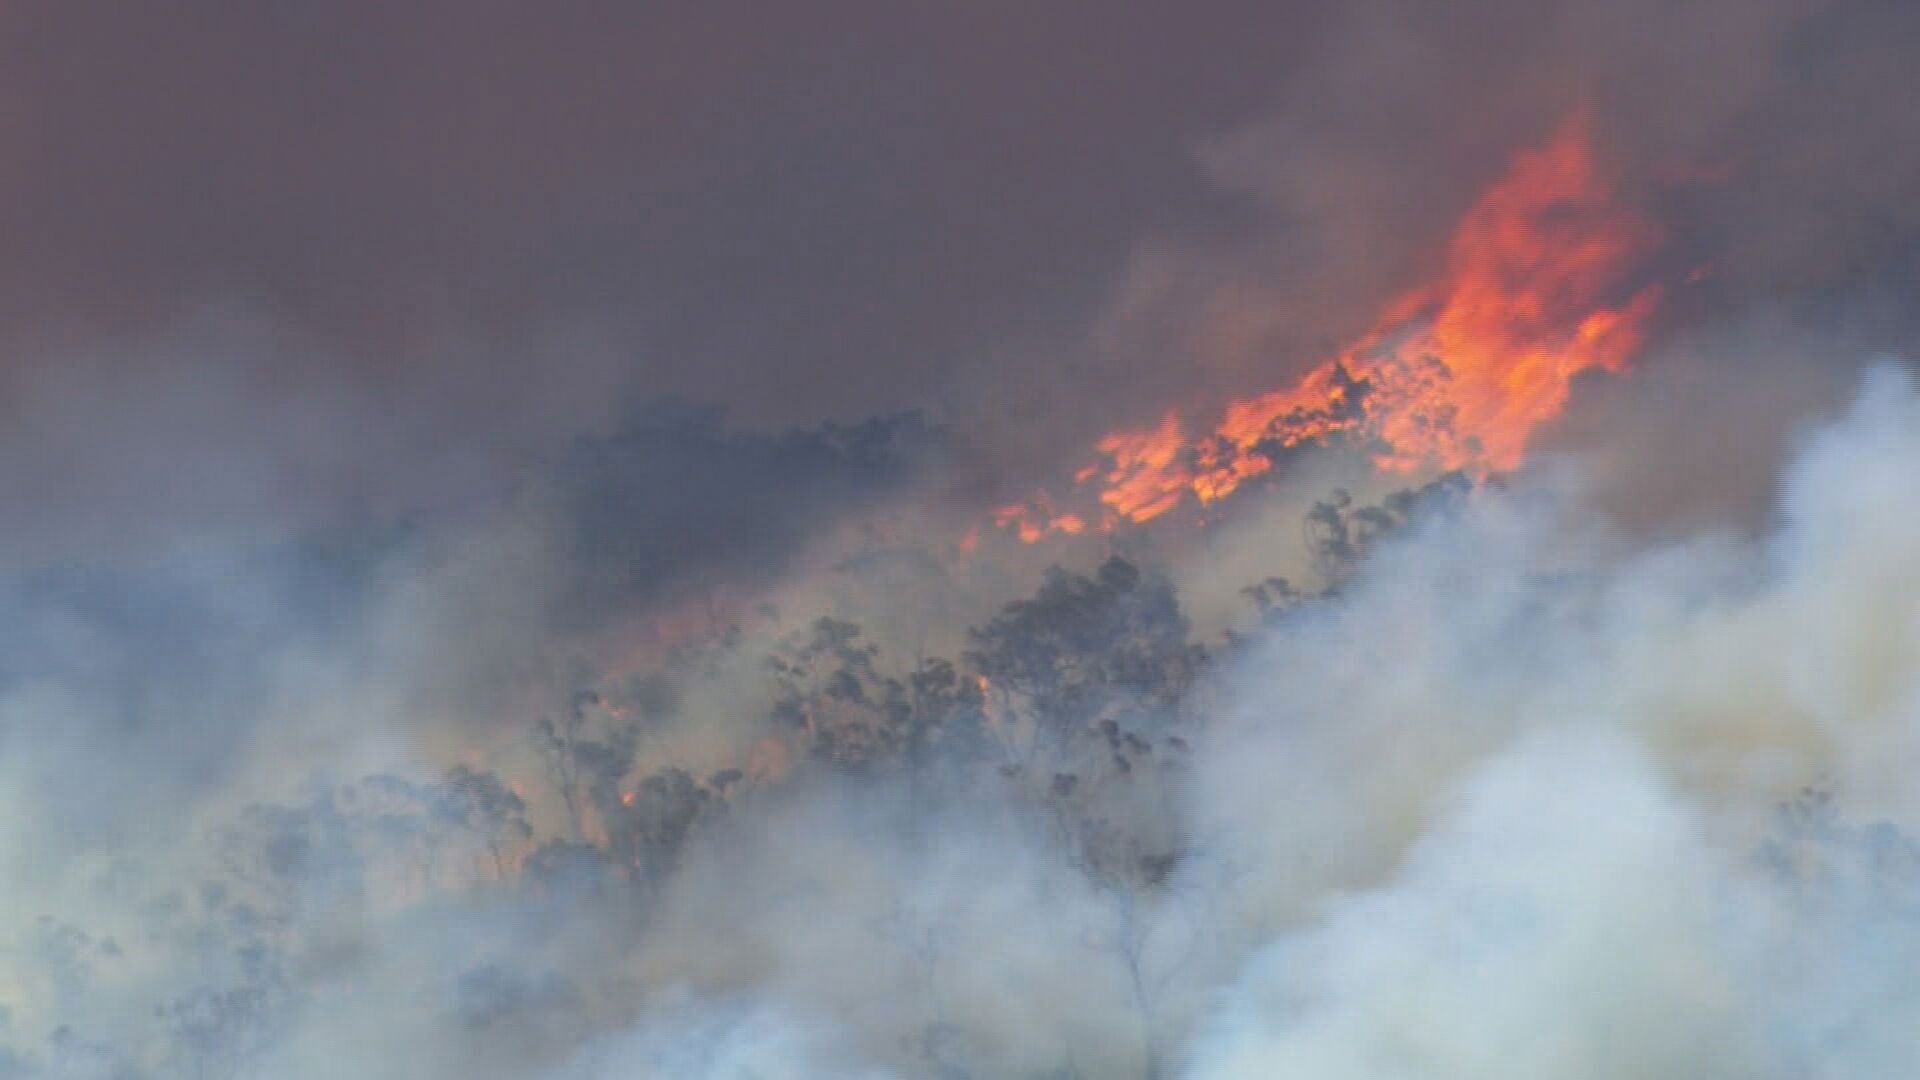 'grave concerns' for communities in victoria as out-of-control fire burns